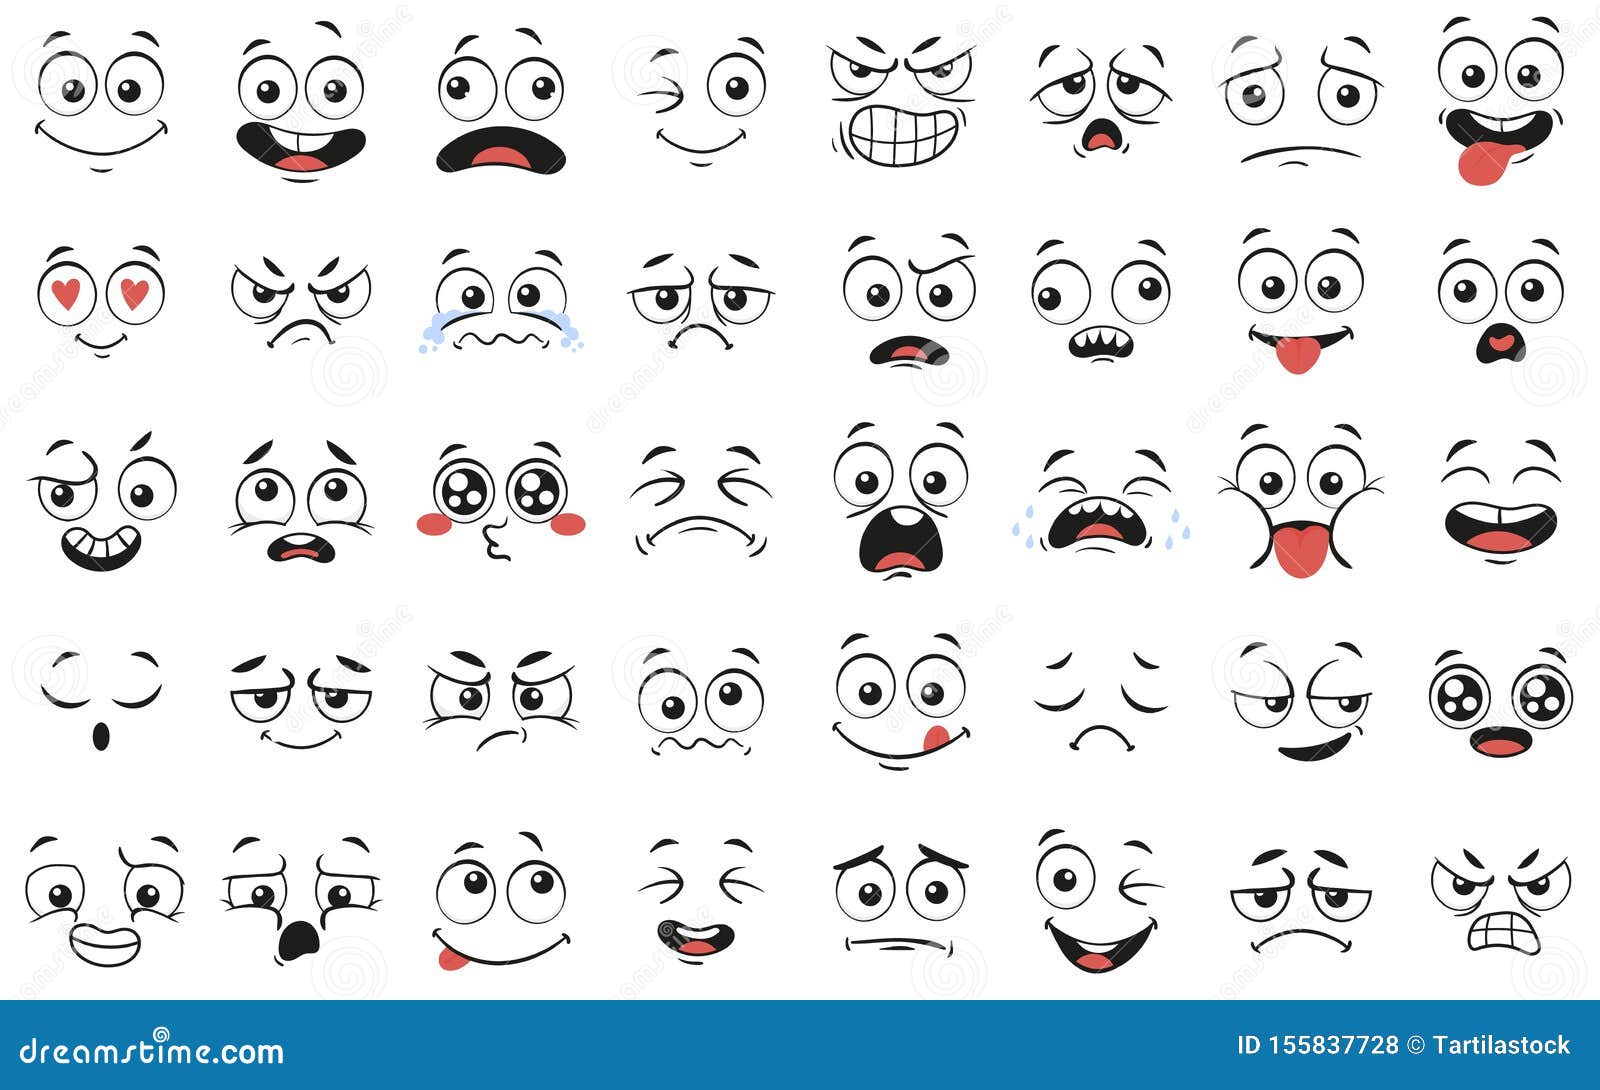 cartoon faces. expressive eyes and mouth, smiling, crying and surprised character face expressions  